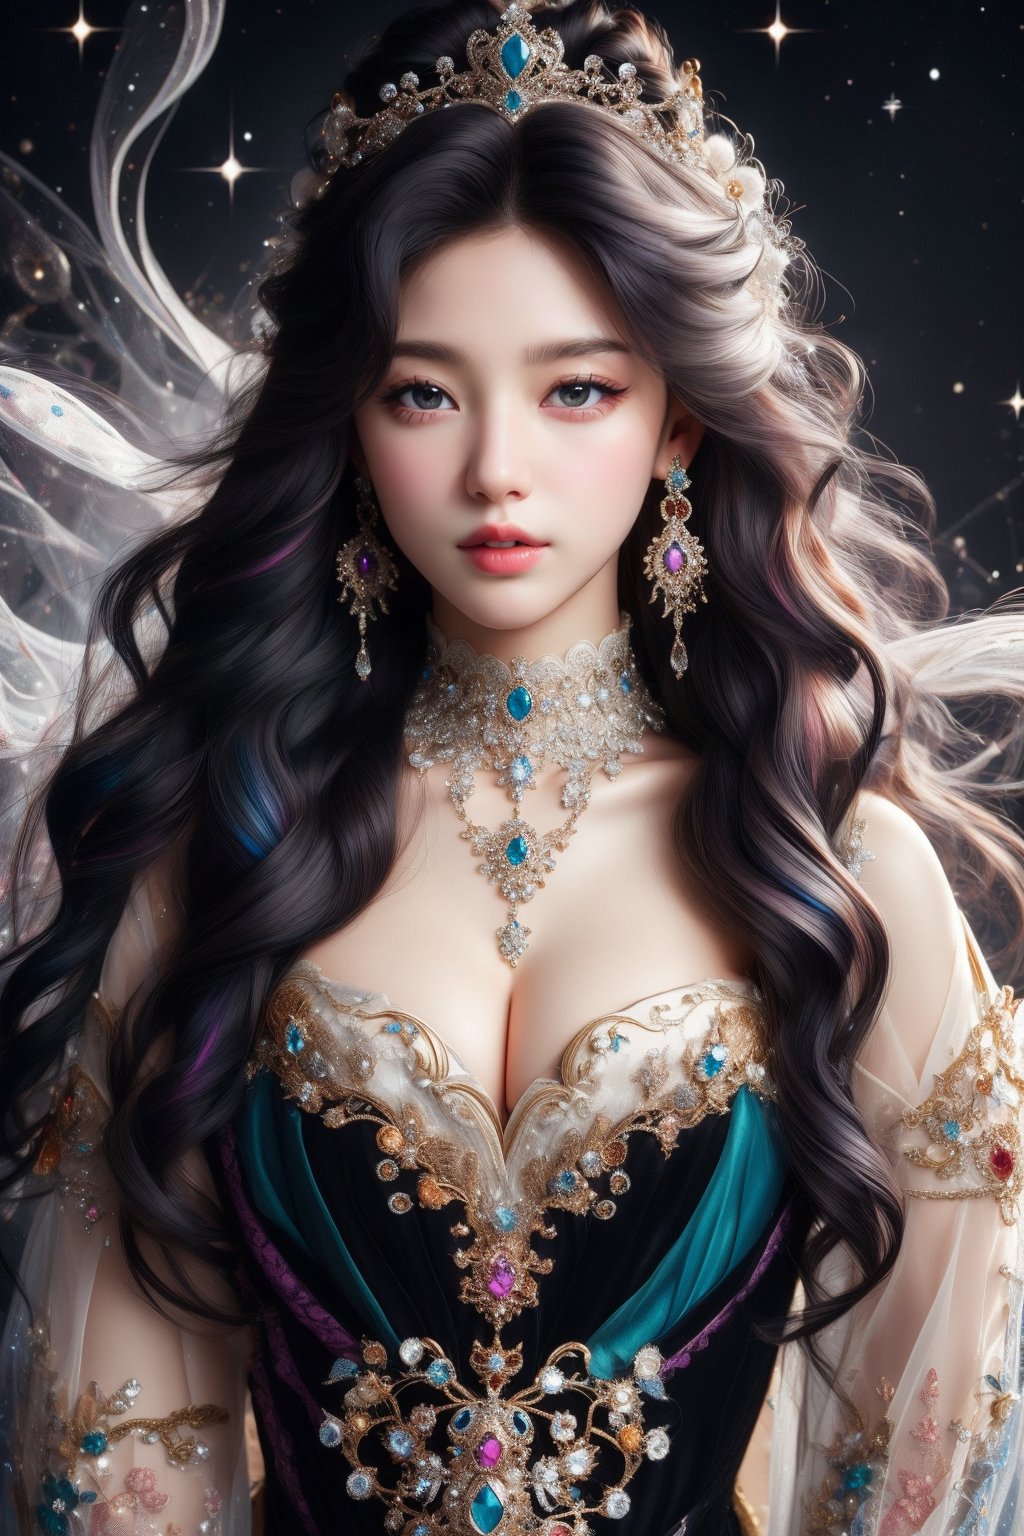 busty and sexy girl, 8k, masterpiece, ultra-realistic, best quality, high resolution, high definition, diamond crown, diamond earrings, diamond necklace, black low-cut princess dress, intricate pattern, black smoky eyeliner, COSMO, GALAXY,stardust ,Her hair is the highlight, flowing around her head with white to iridescent hues